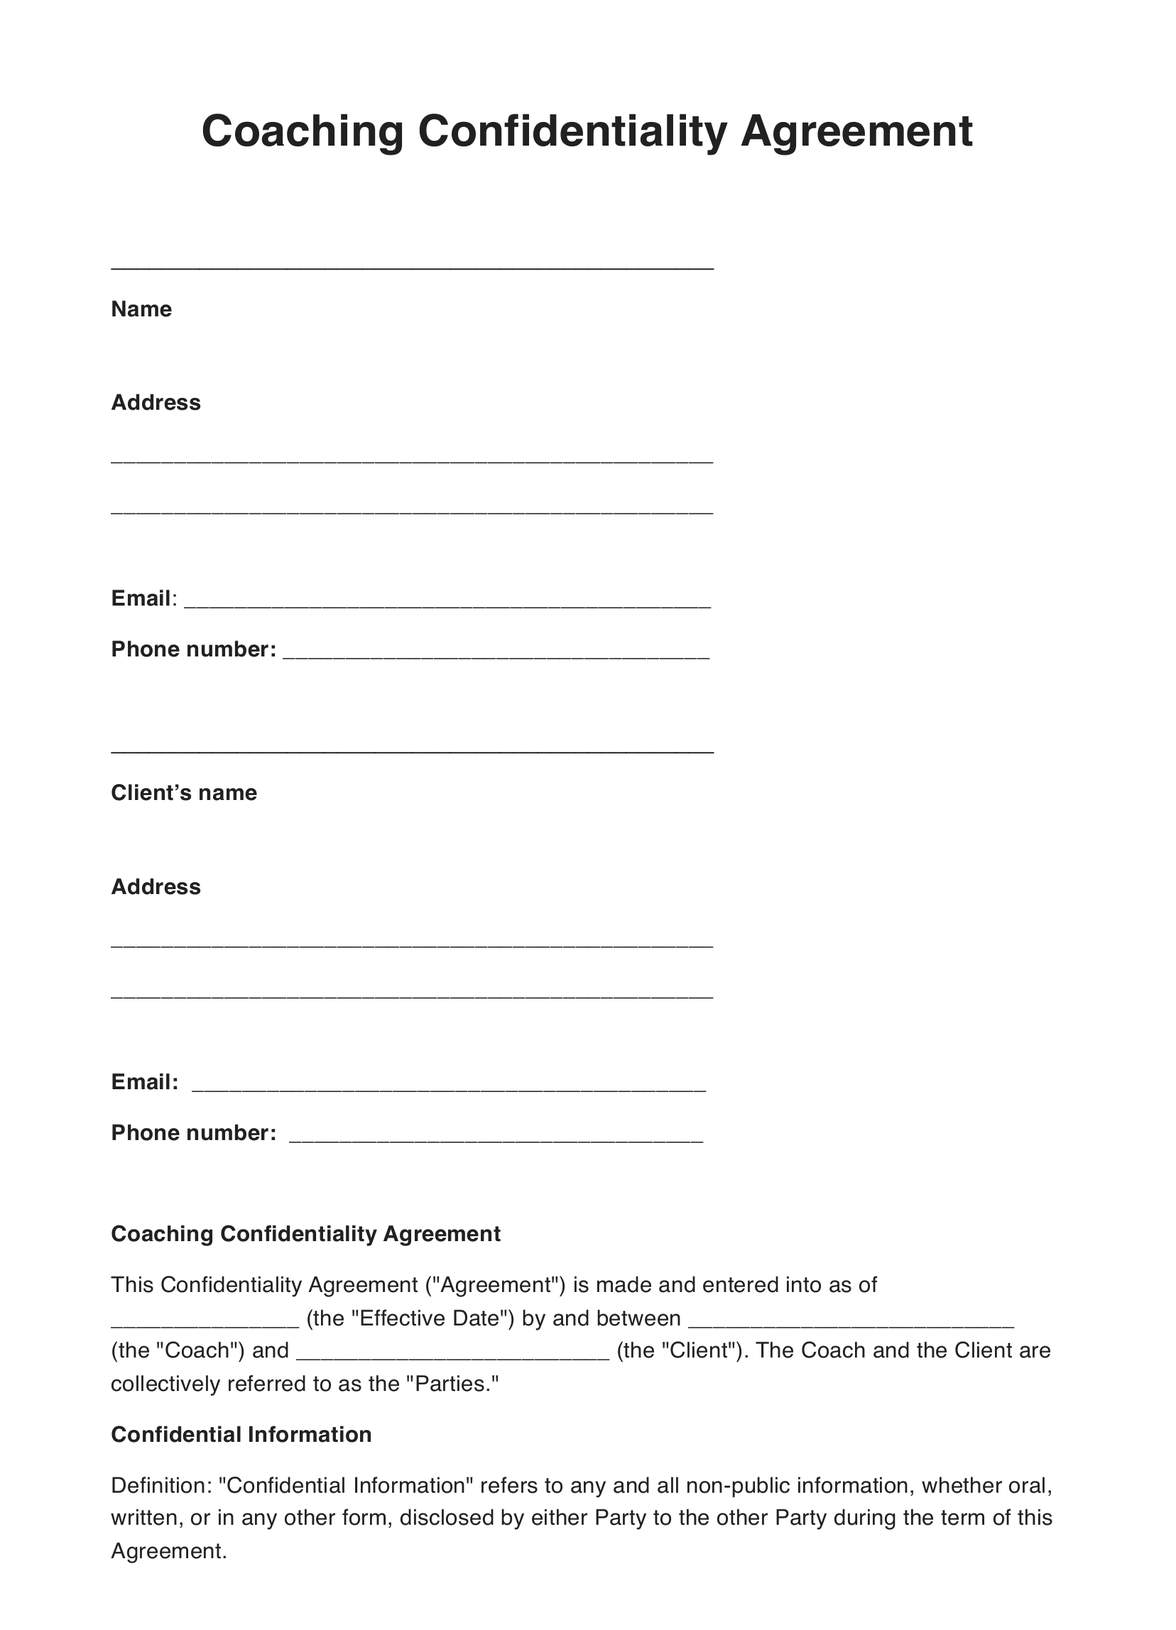 Coaching Confidentiality Agreements PDF Example